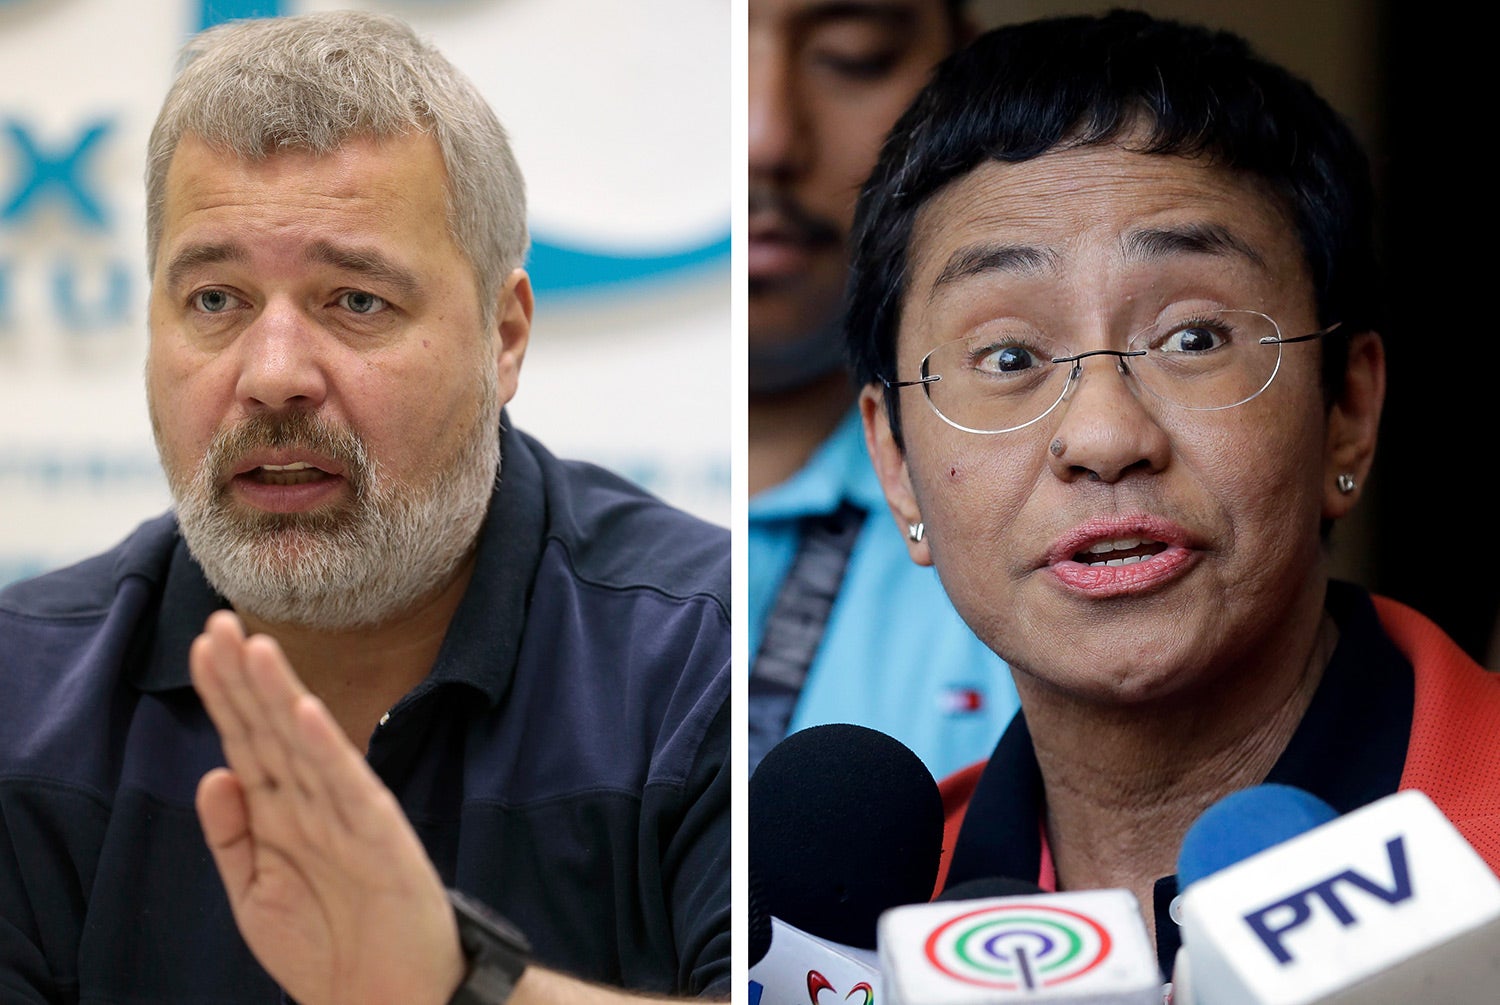 The 2021 Nobel Peace Prize was awarded to journalists Dmitry Muratov of Russia (left) and to Maria Ressa of the Philippines for their fight for freedom of expression.